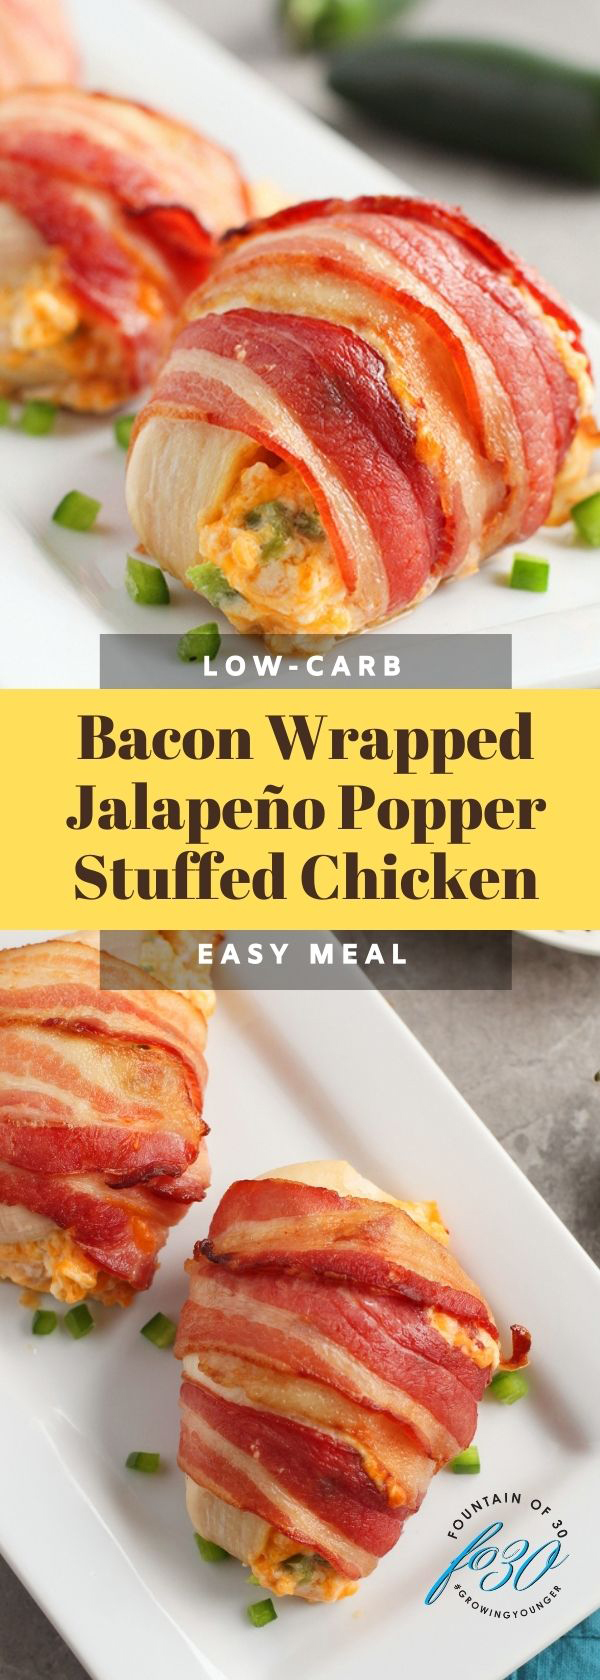 jalapeno popper stuffed chicken wrapped in bacon fountainof30